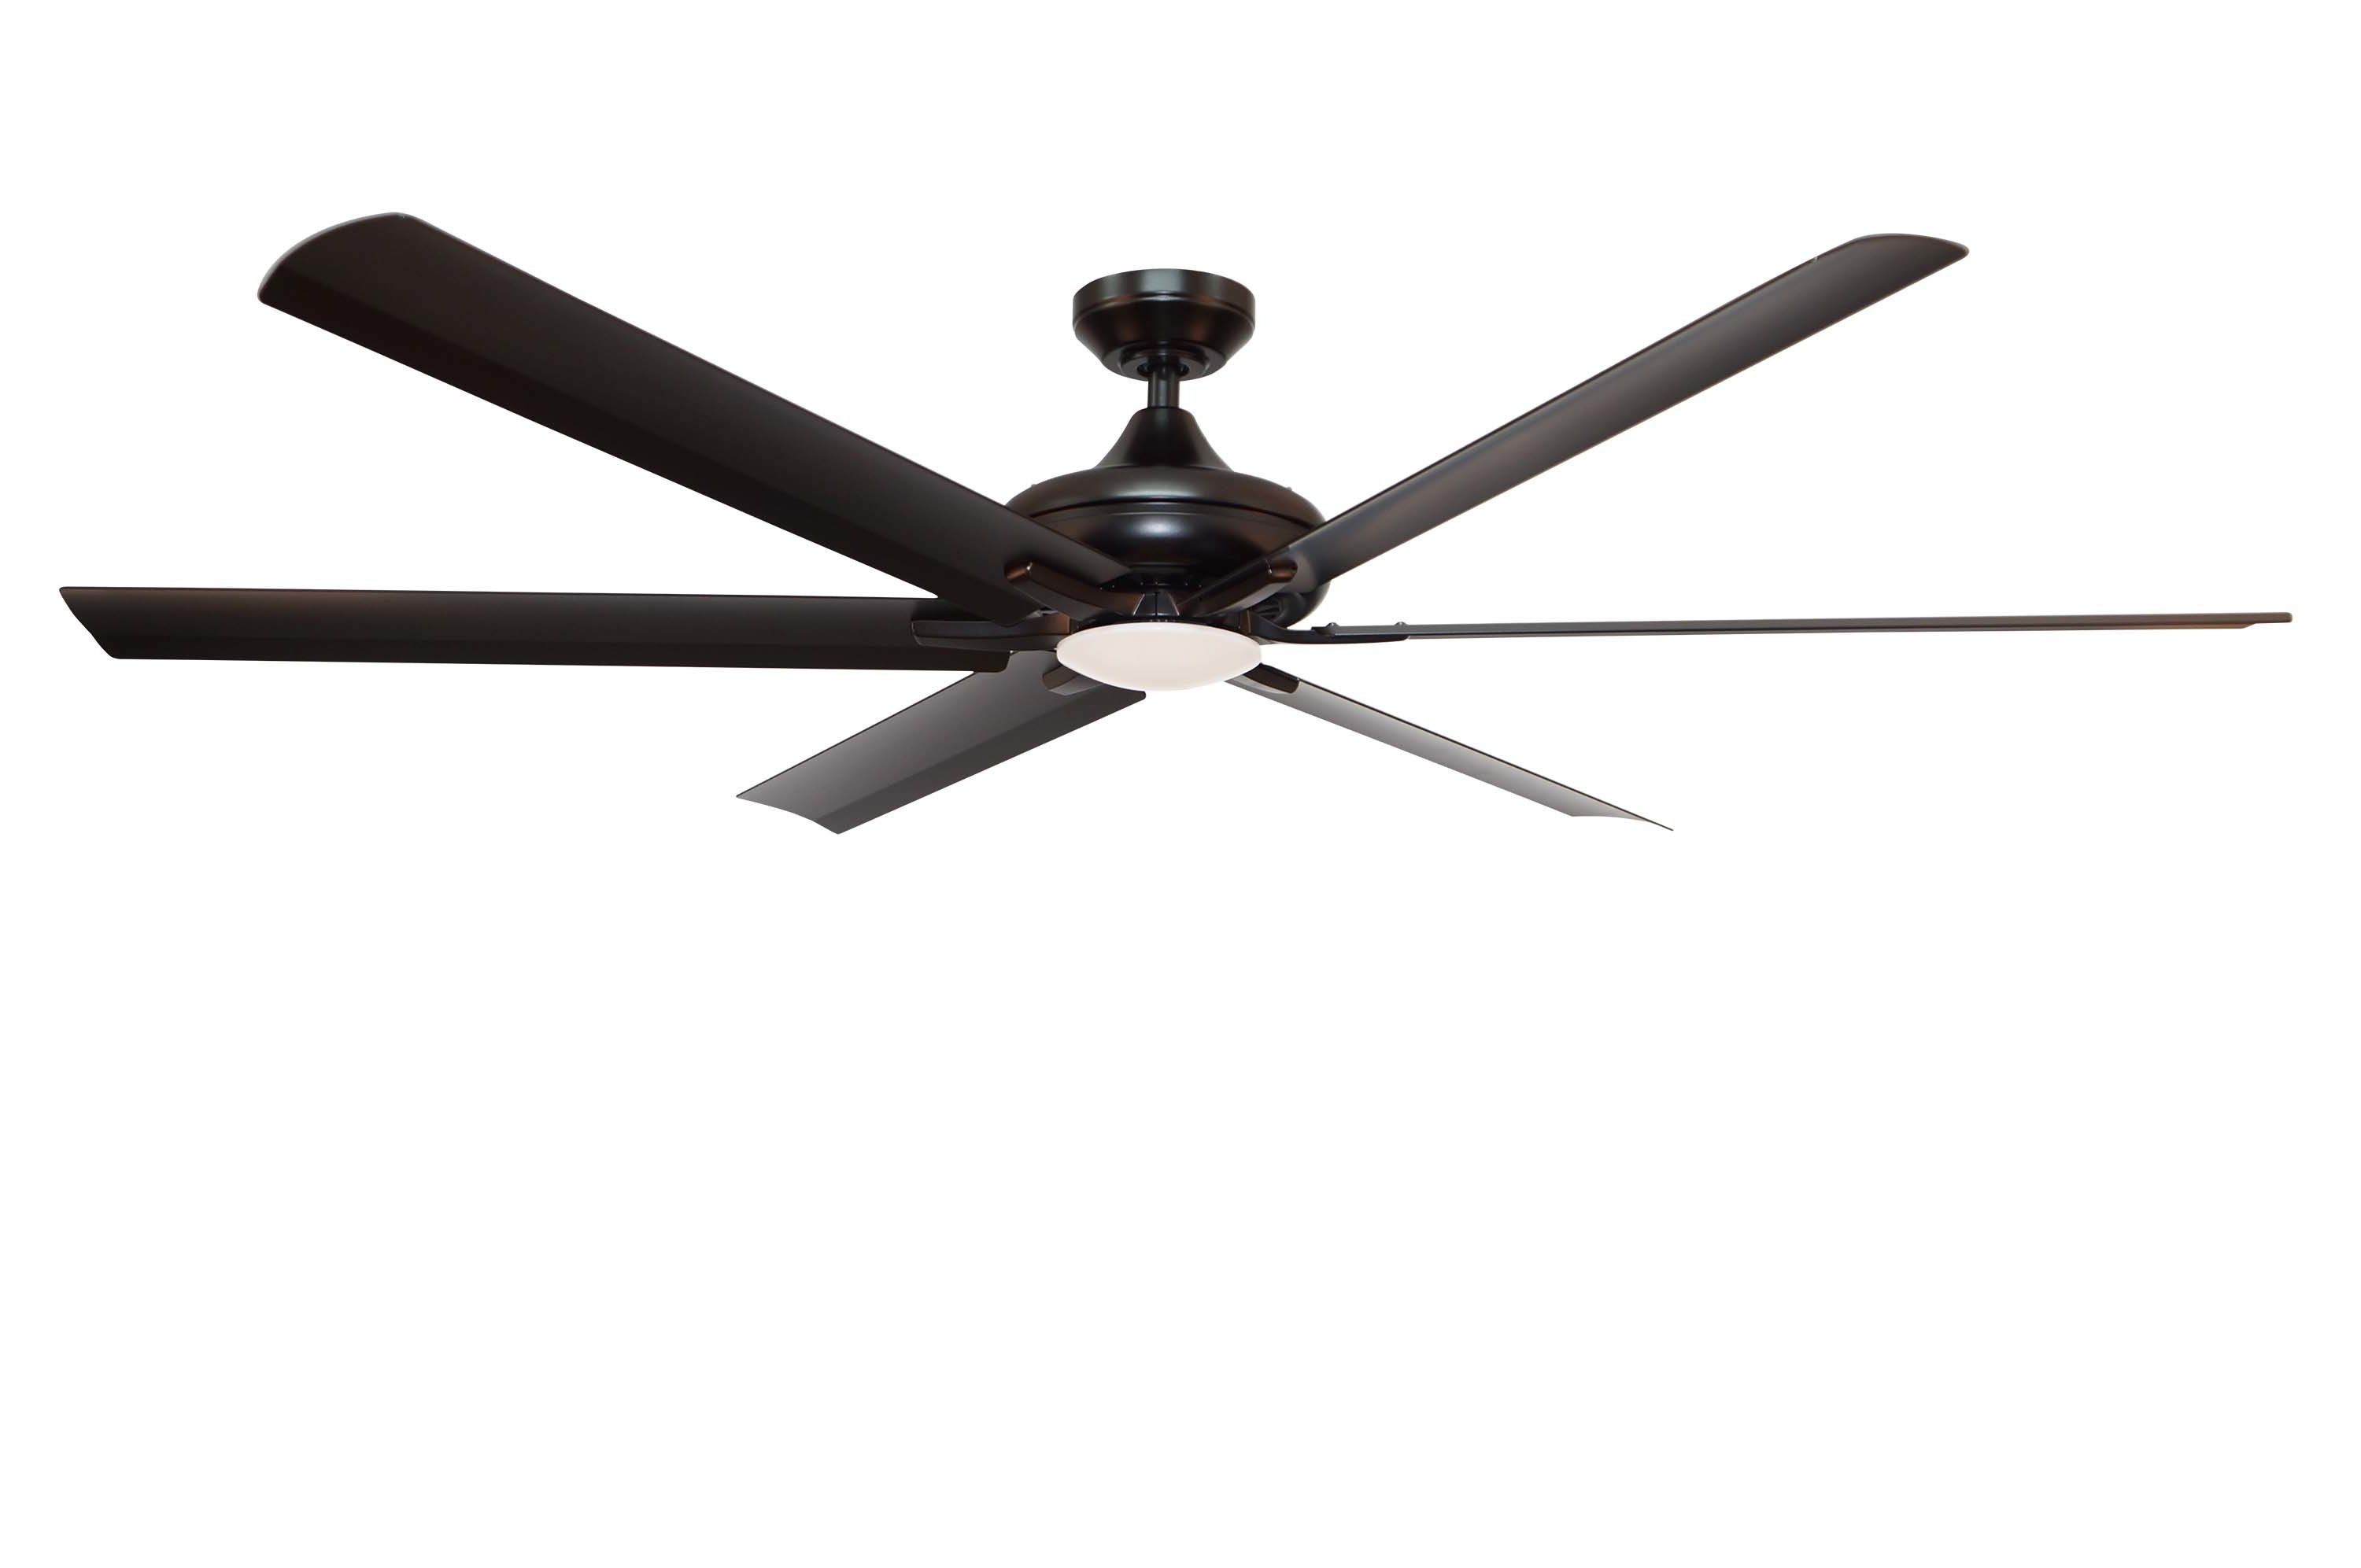 Most Recent Farmhouse & Rustic Darby Home Co Ceiling Fans (View 8 of 20)